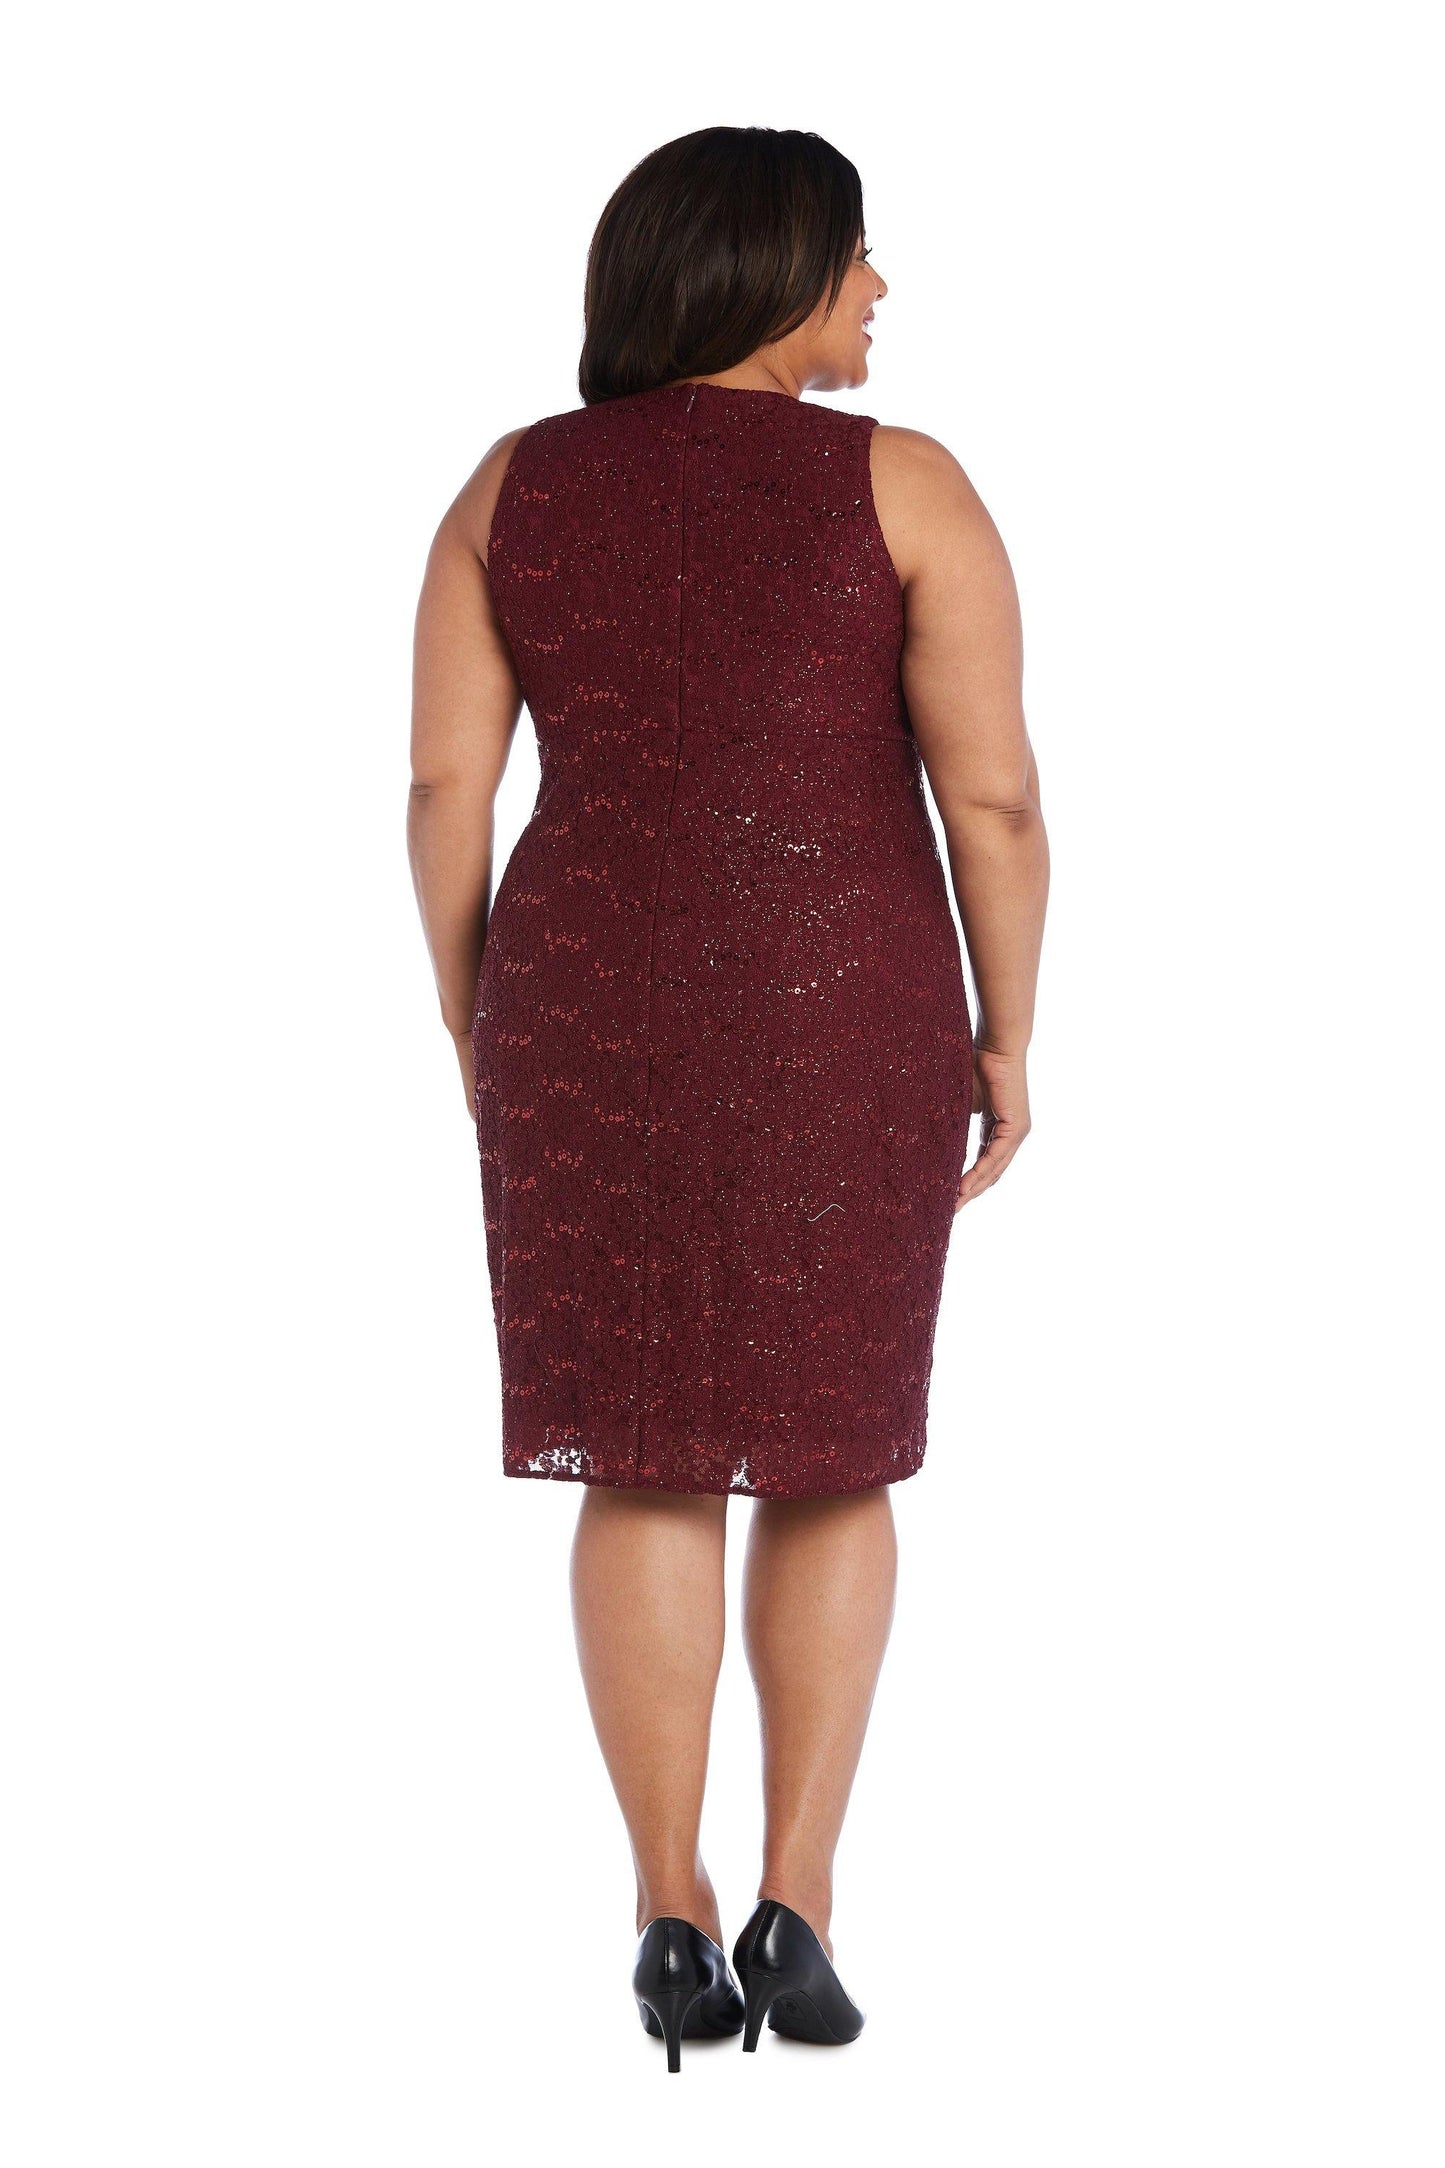 Nightway Short Plus Size Cocktail Lace Dress 21500W - The Dress Outlet